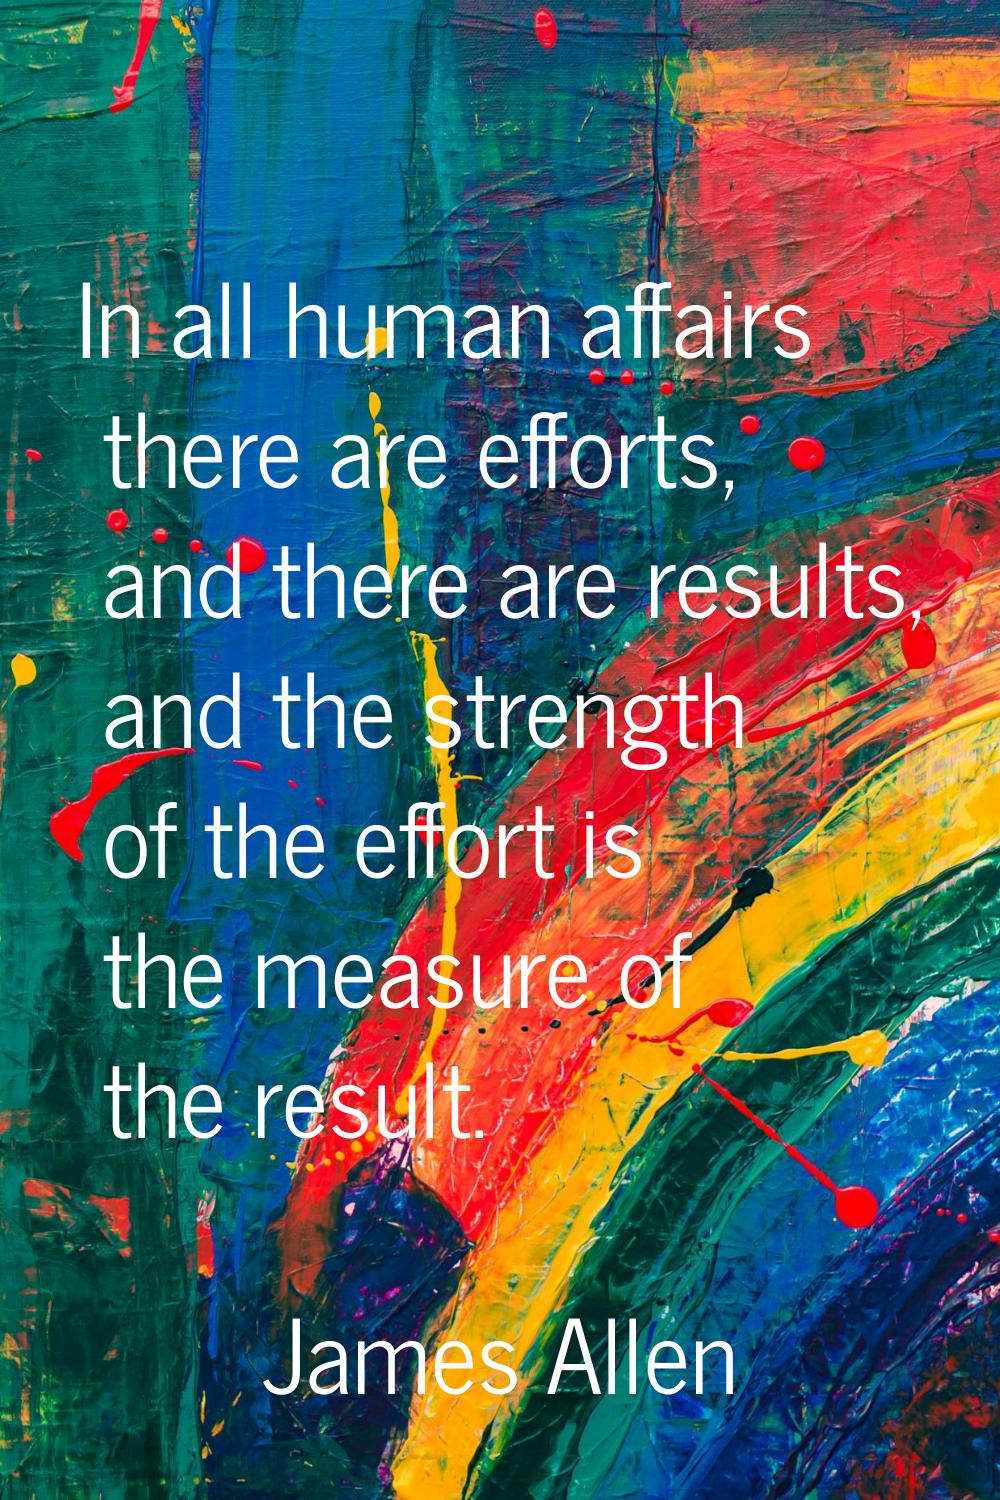 In all human affairs there are efforts, and there are results, and the strength of the effort is th